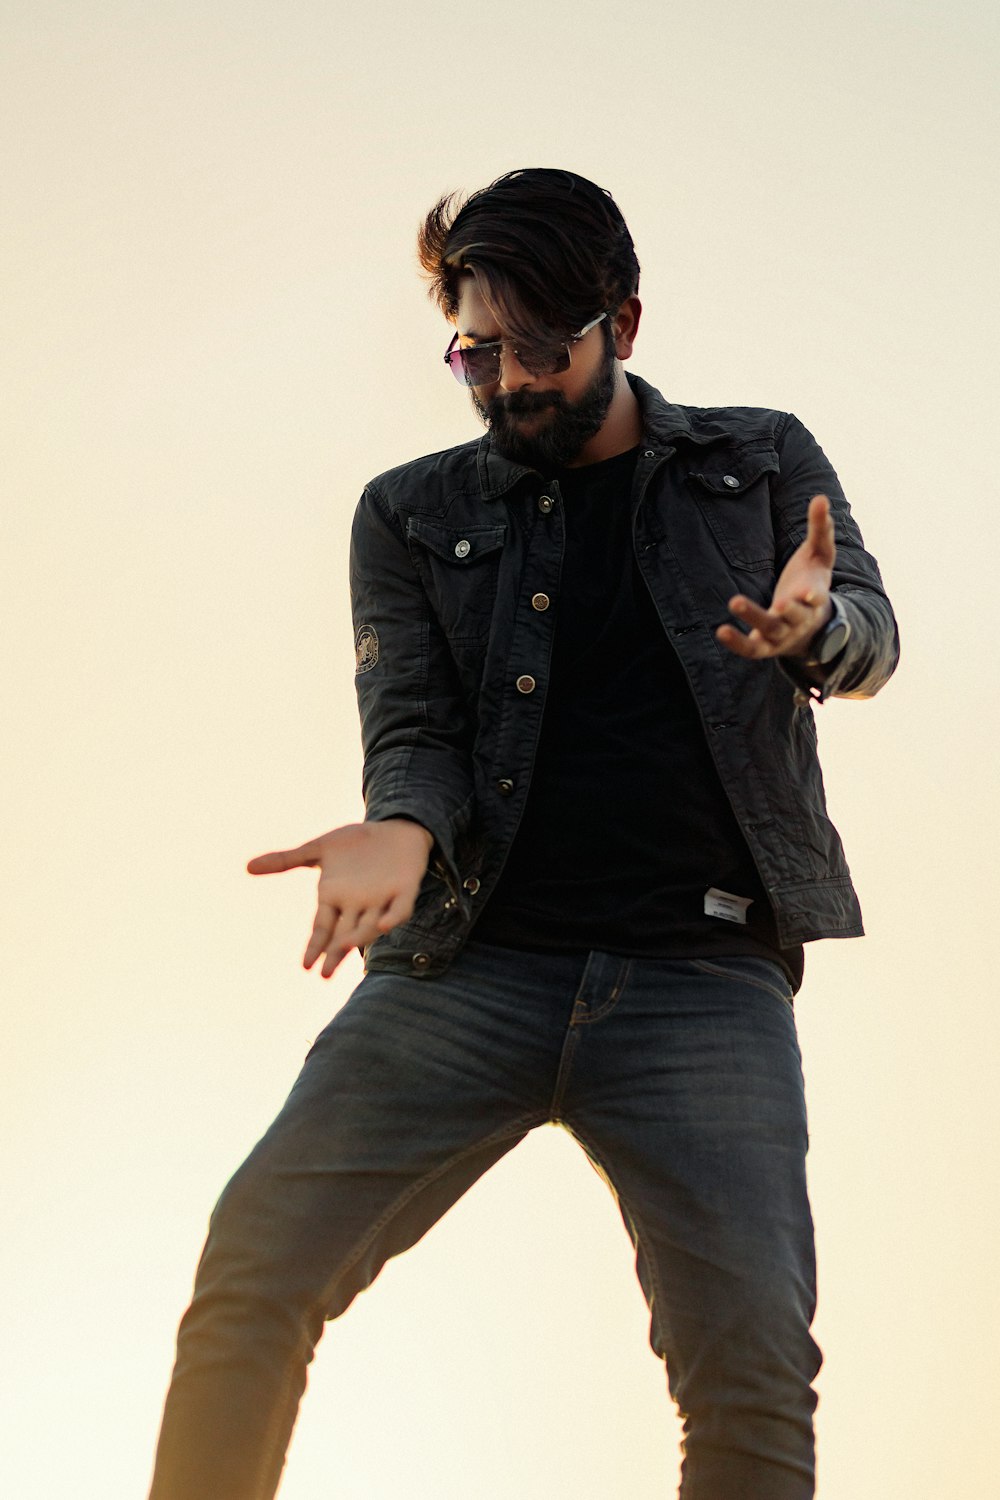 a man in a black shirt and jeans doing a trick on a skateboard